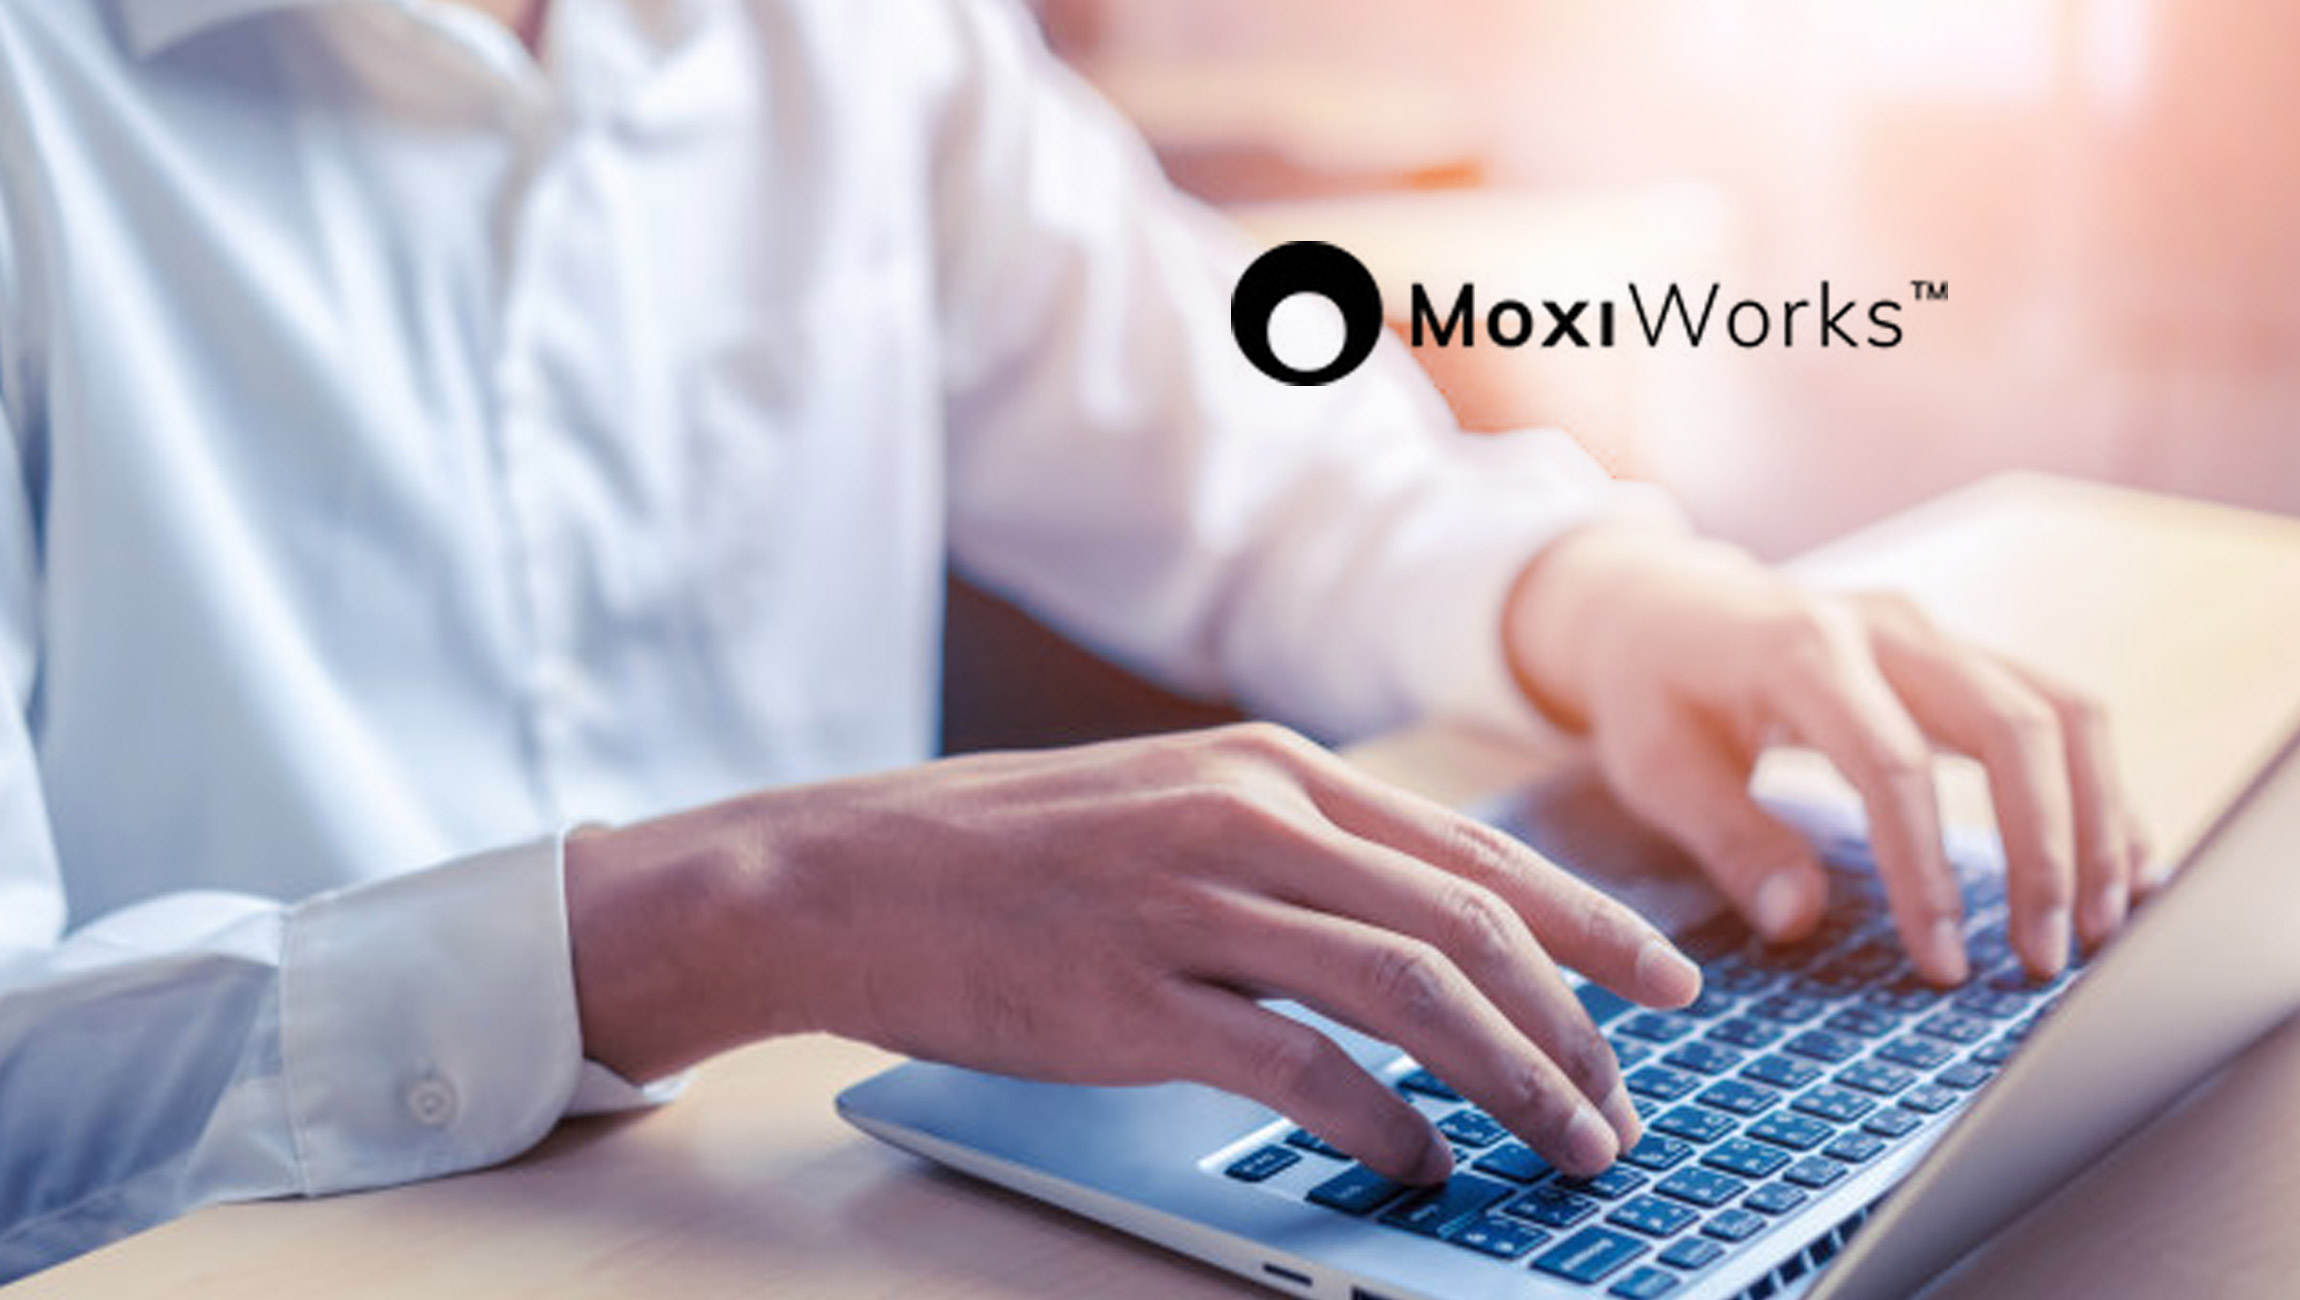 MoxiWorks-adds-to-leading-suite-of-technology_-acquires-reeazily